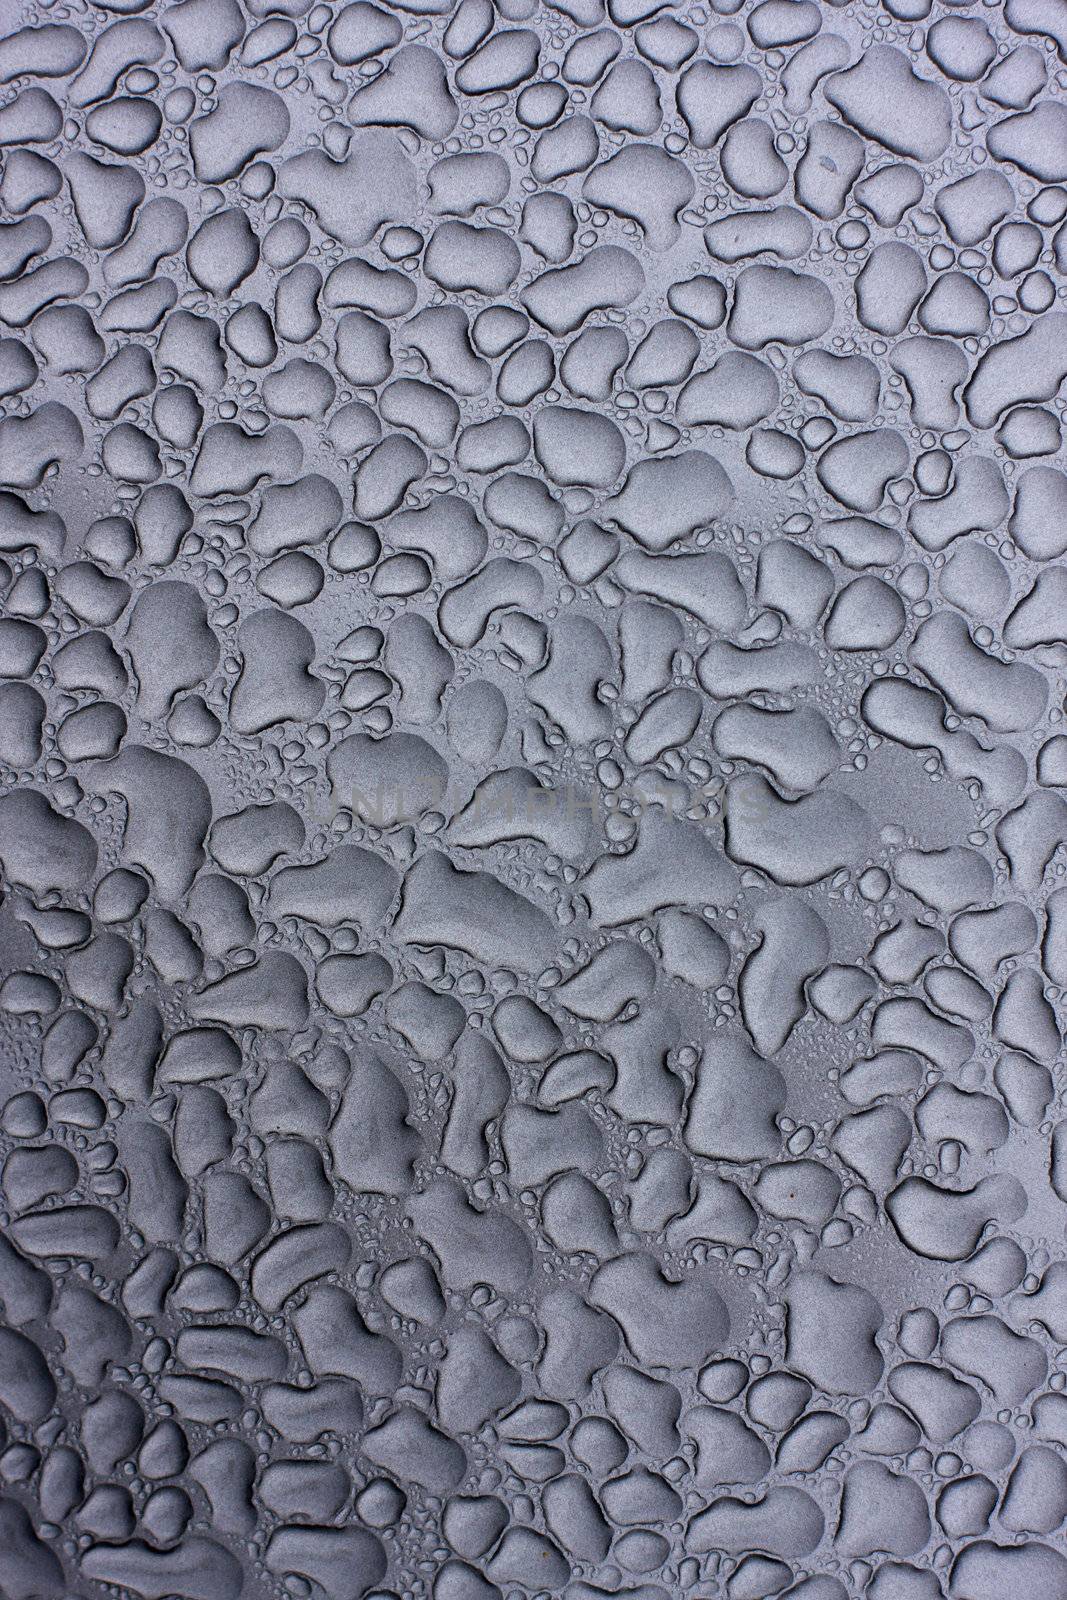 raindrops on metal by sumos